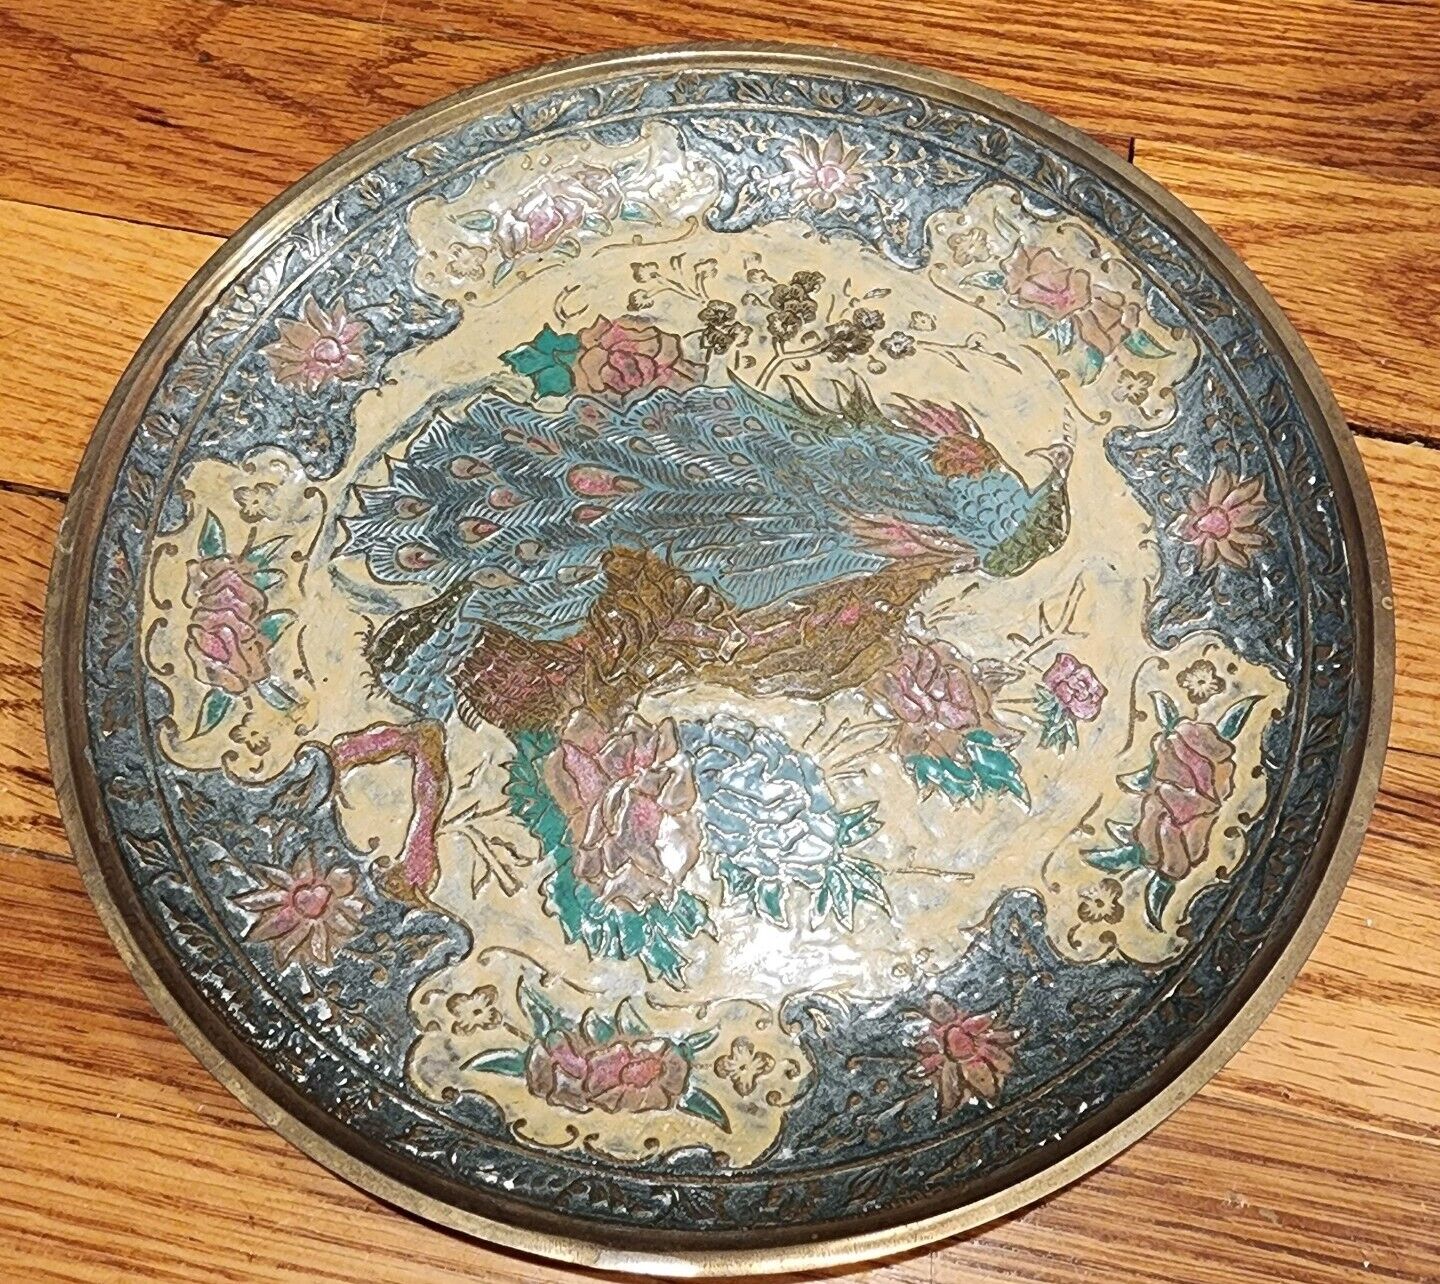 1970s Vintage Brass Peacock  Handcrafted Enameled Etched  Decorative Plate 8”